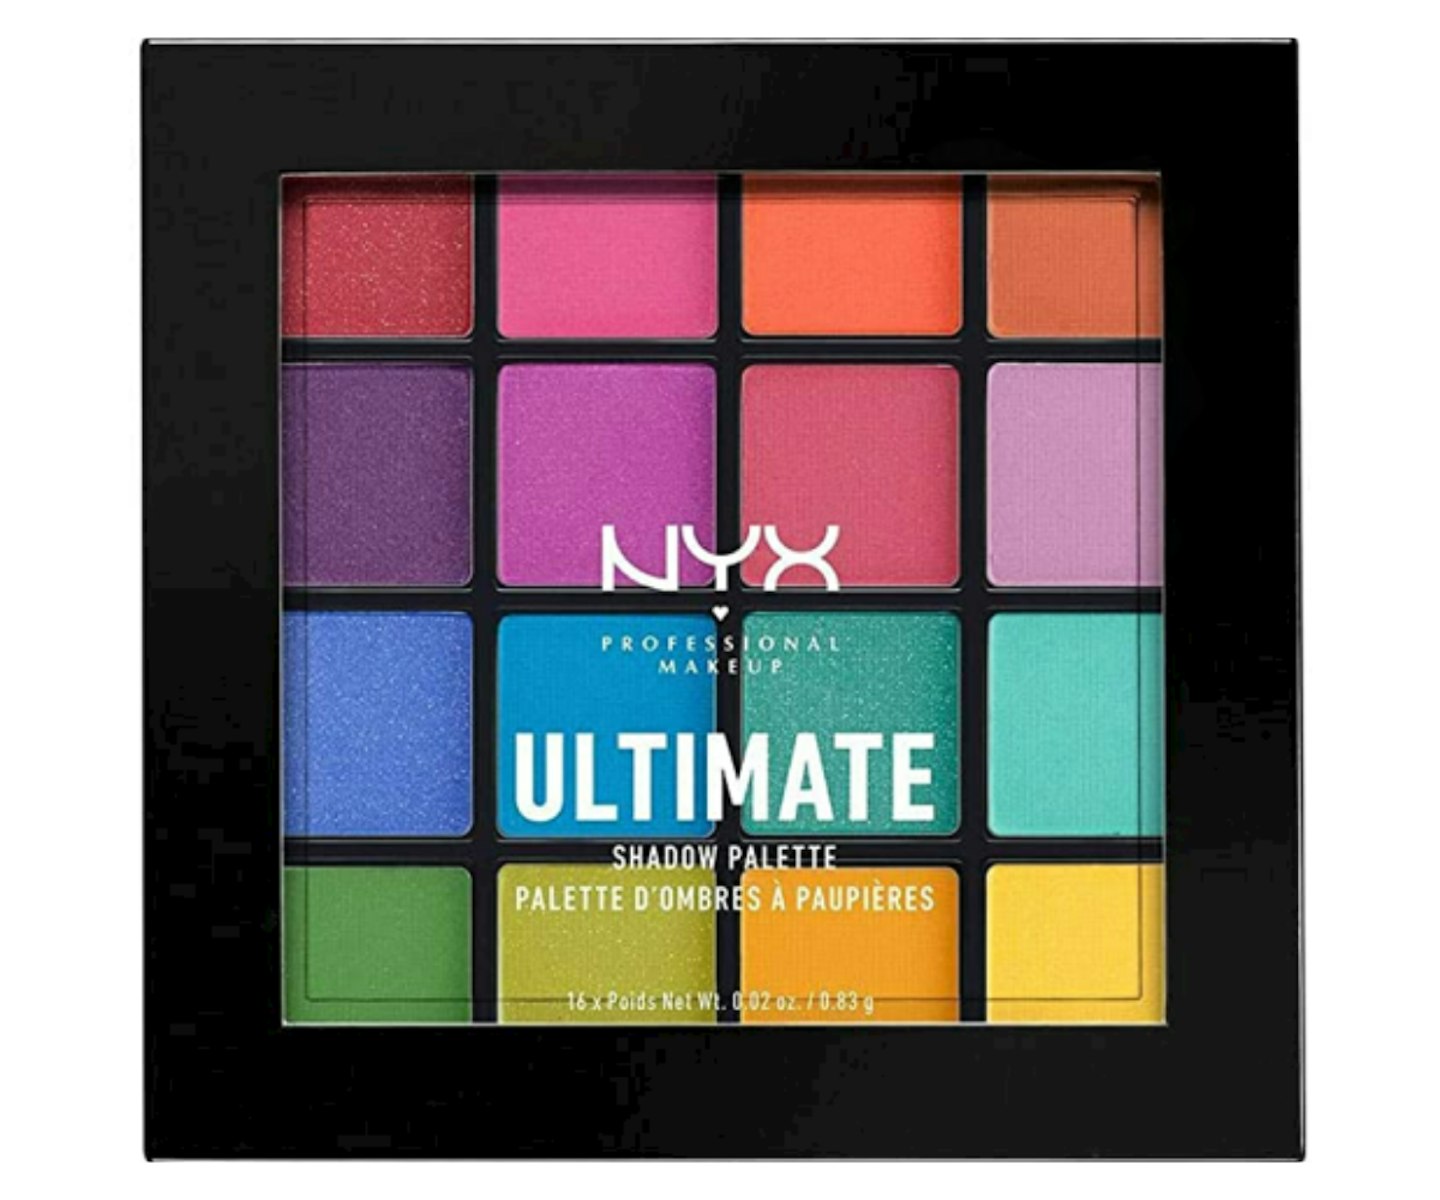 A picture of the NYX Ultimate Shadow Palette